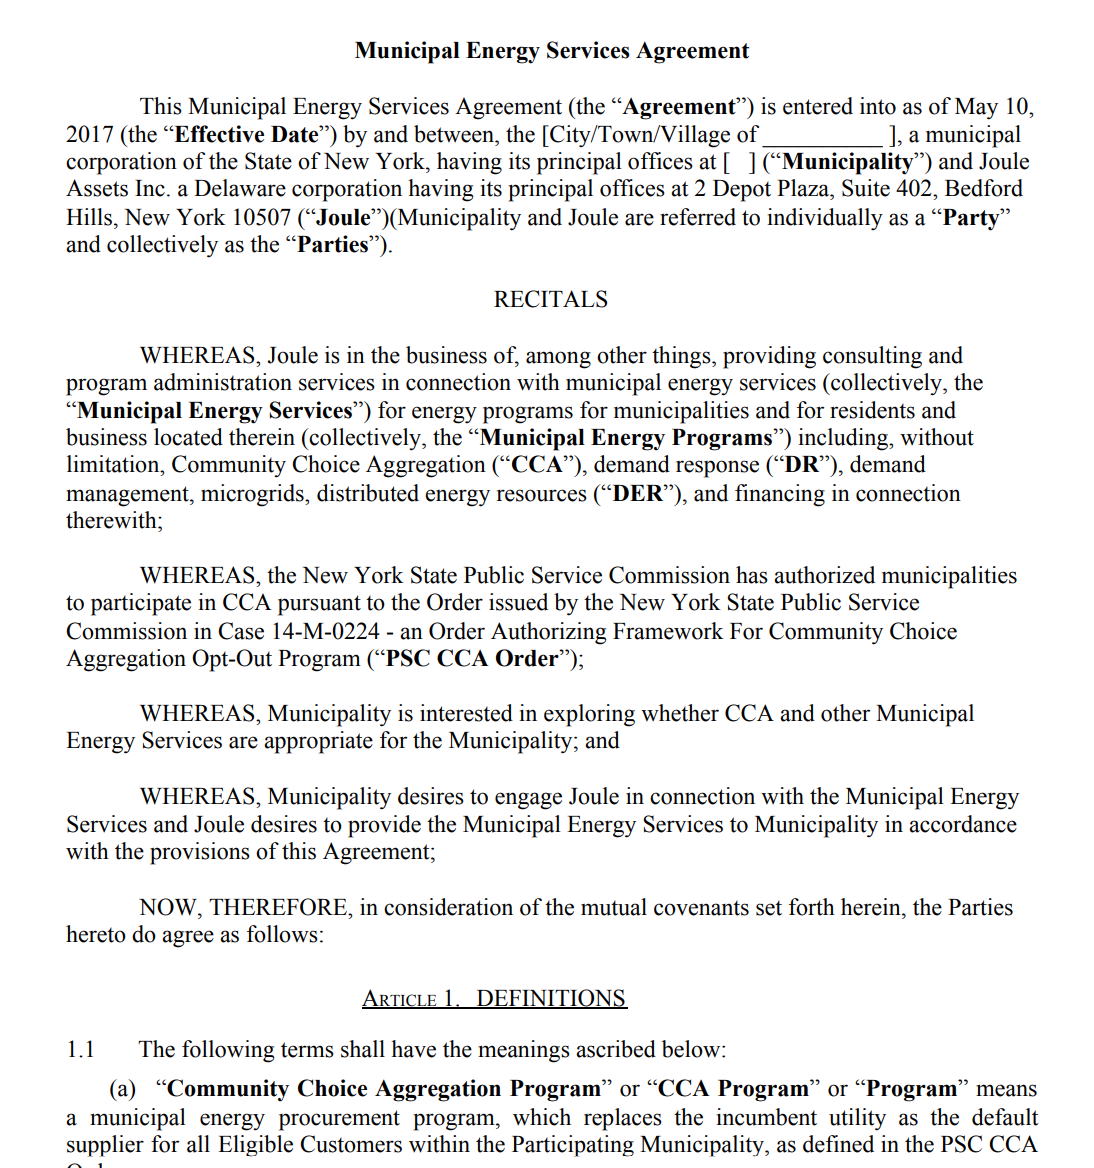 5. Municipal Energy Services Agreement